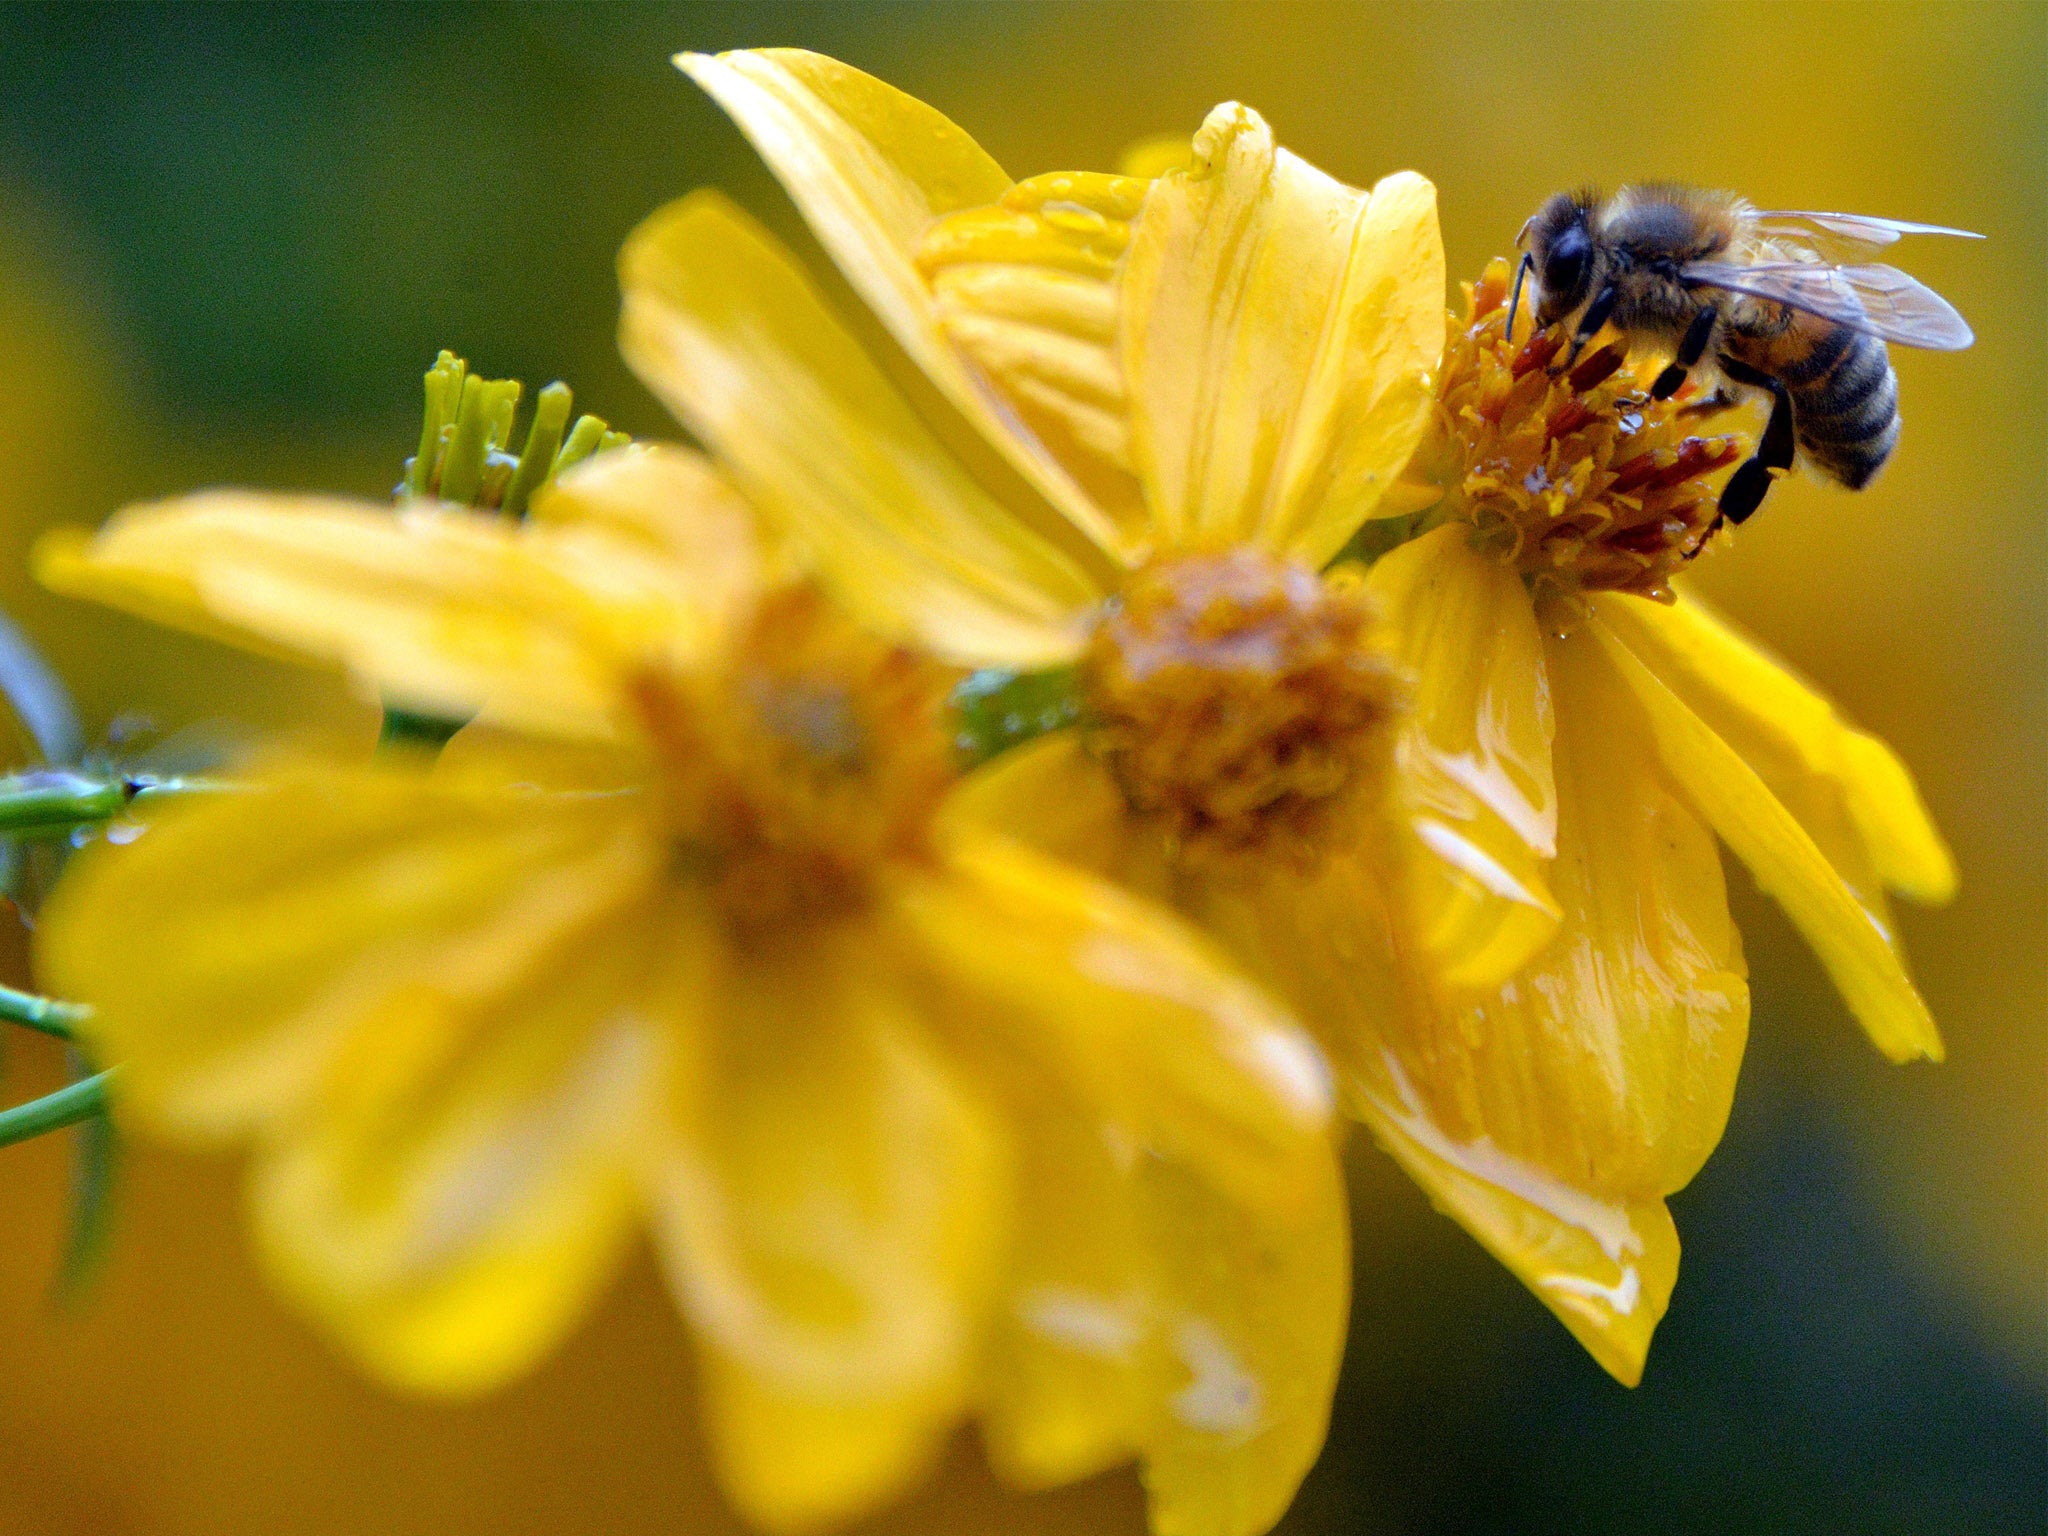 A bee collects nectar from a flower on a rainy day in Sydney on 17 June 2015.